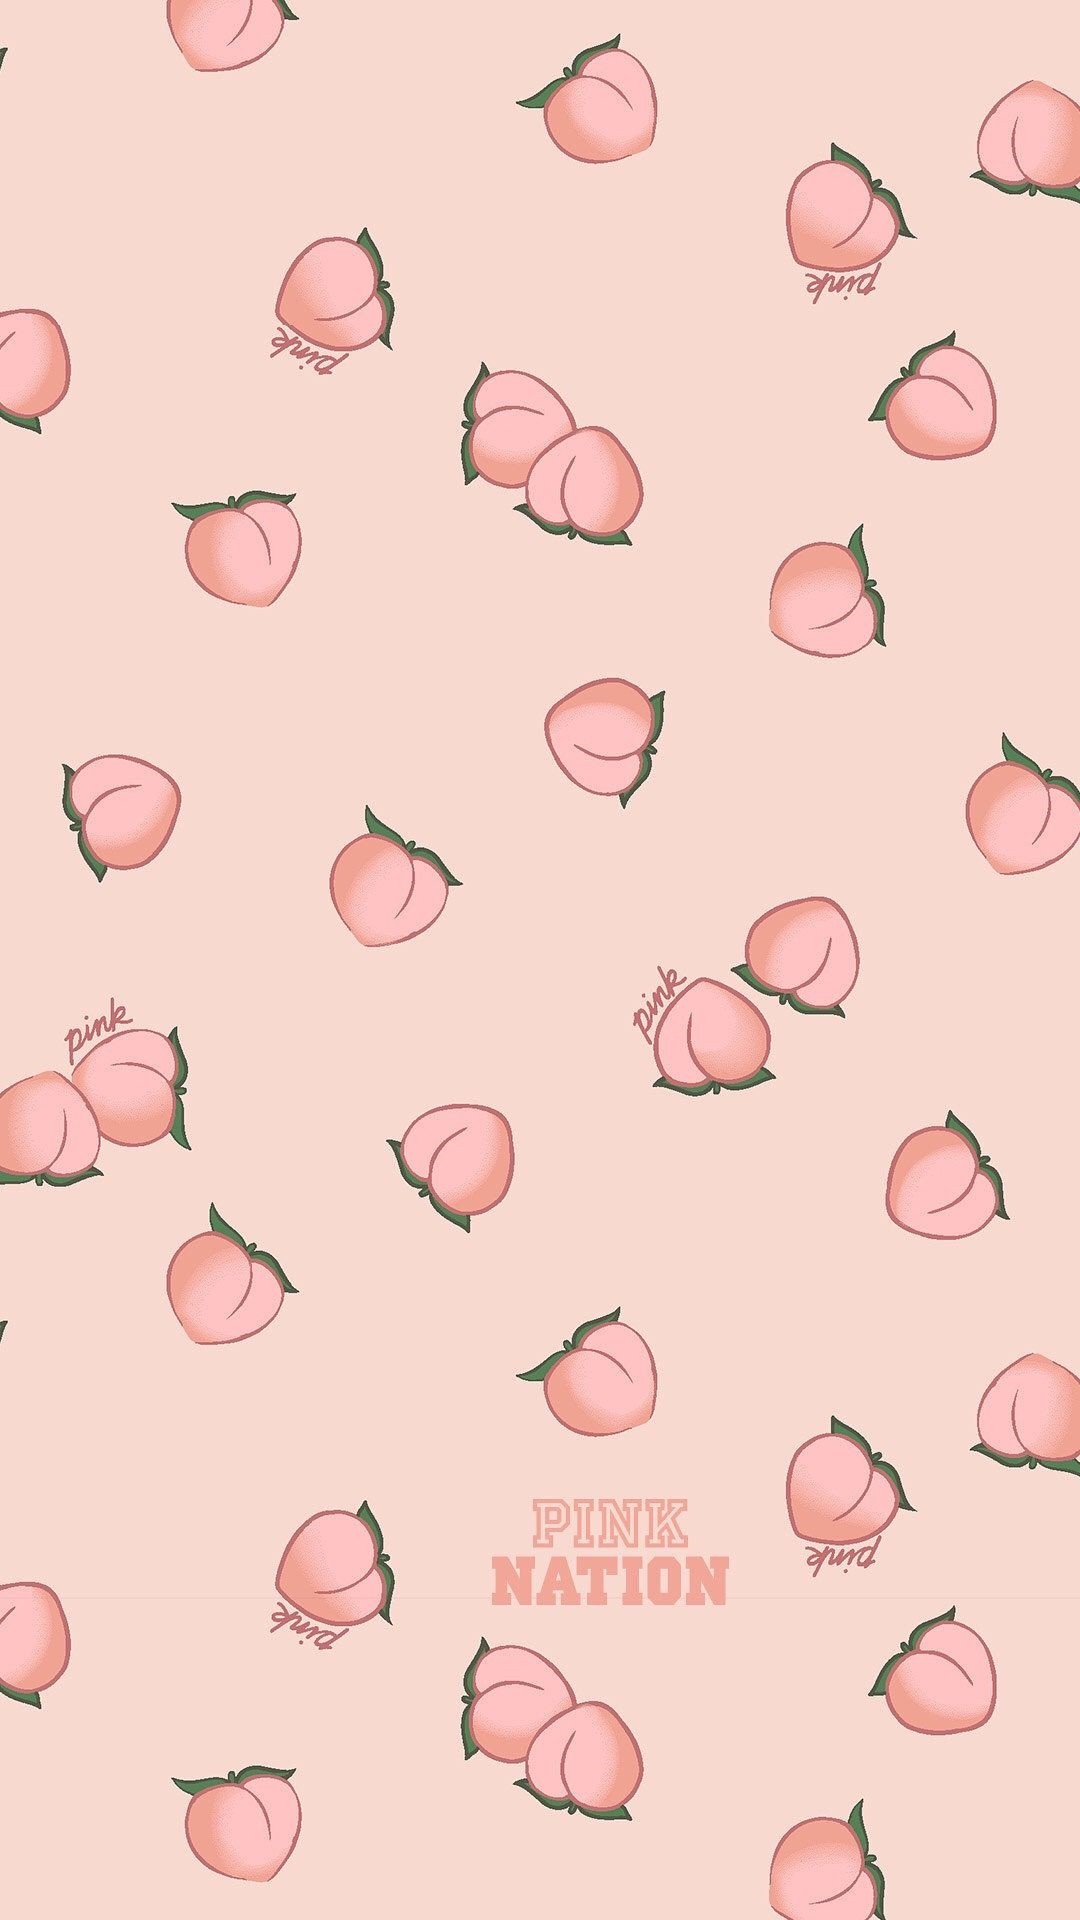 Cute Aesthetic Iphone Wallpapers